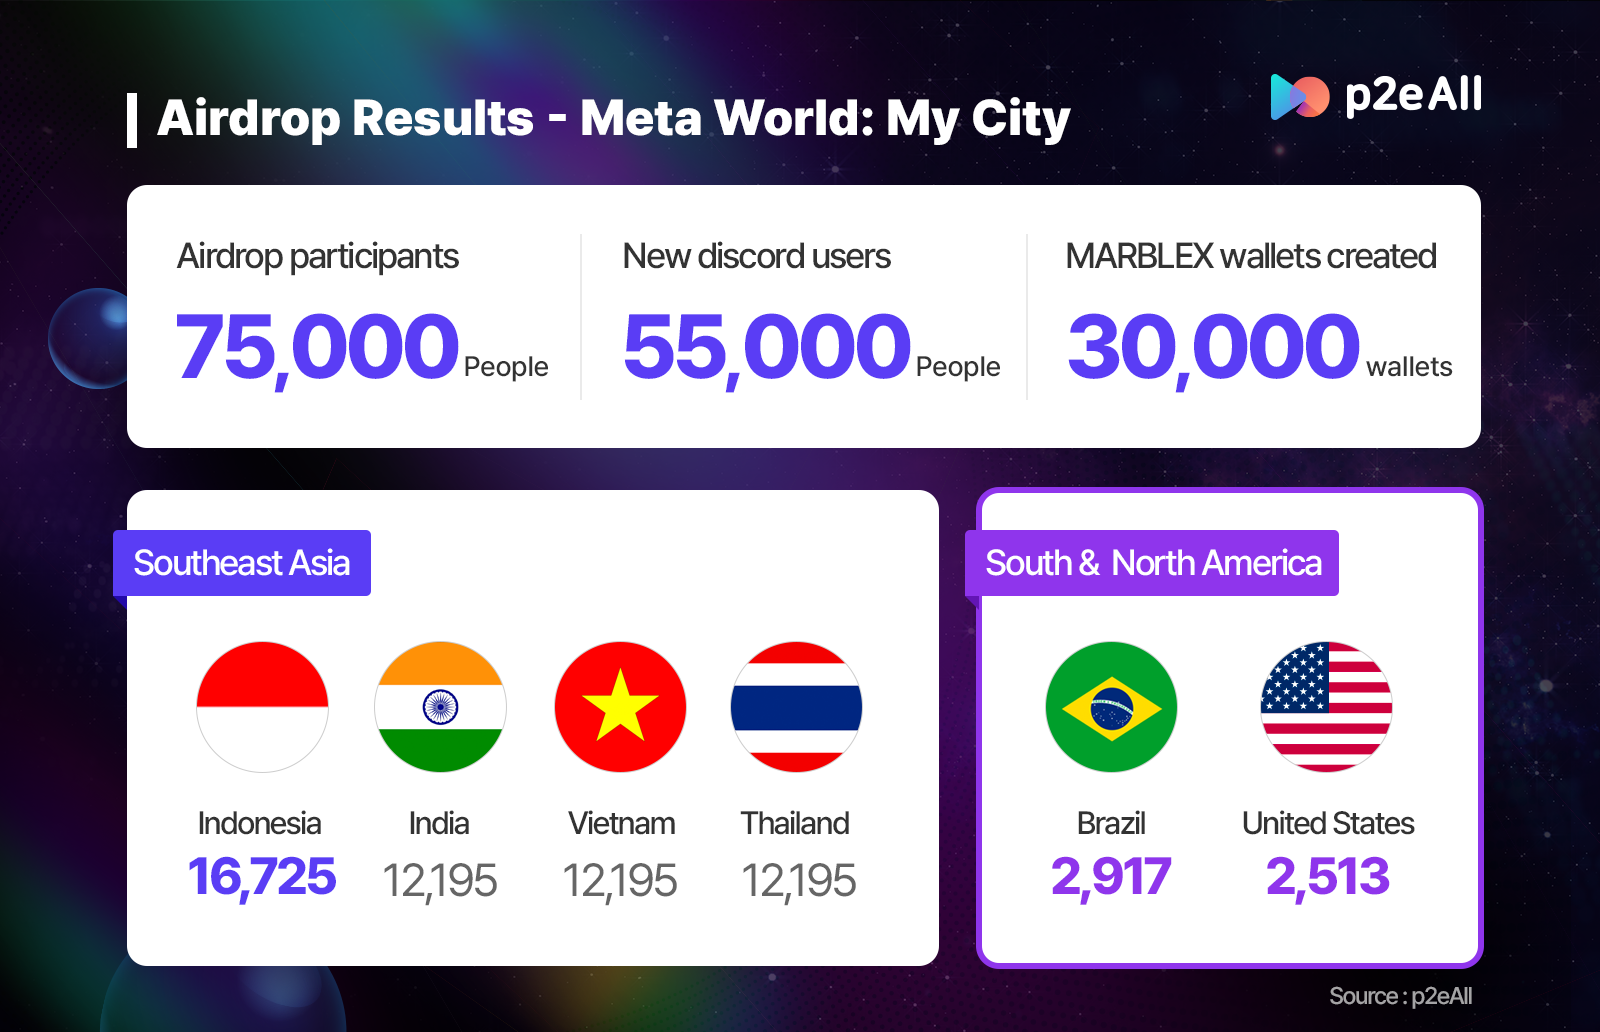 Despite the fact that there were 9 actions required to participate in the airdrop, including installing Marblex Wallet, the event attracted approximately 75,000 global users, 55,000 new users on Meta World: My City community channels (Discord, Twitter, etc.), and 30,000 new Marblex Wallet installs.